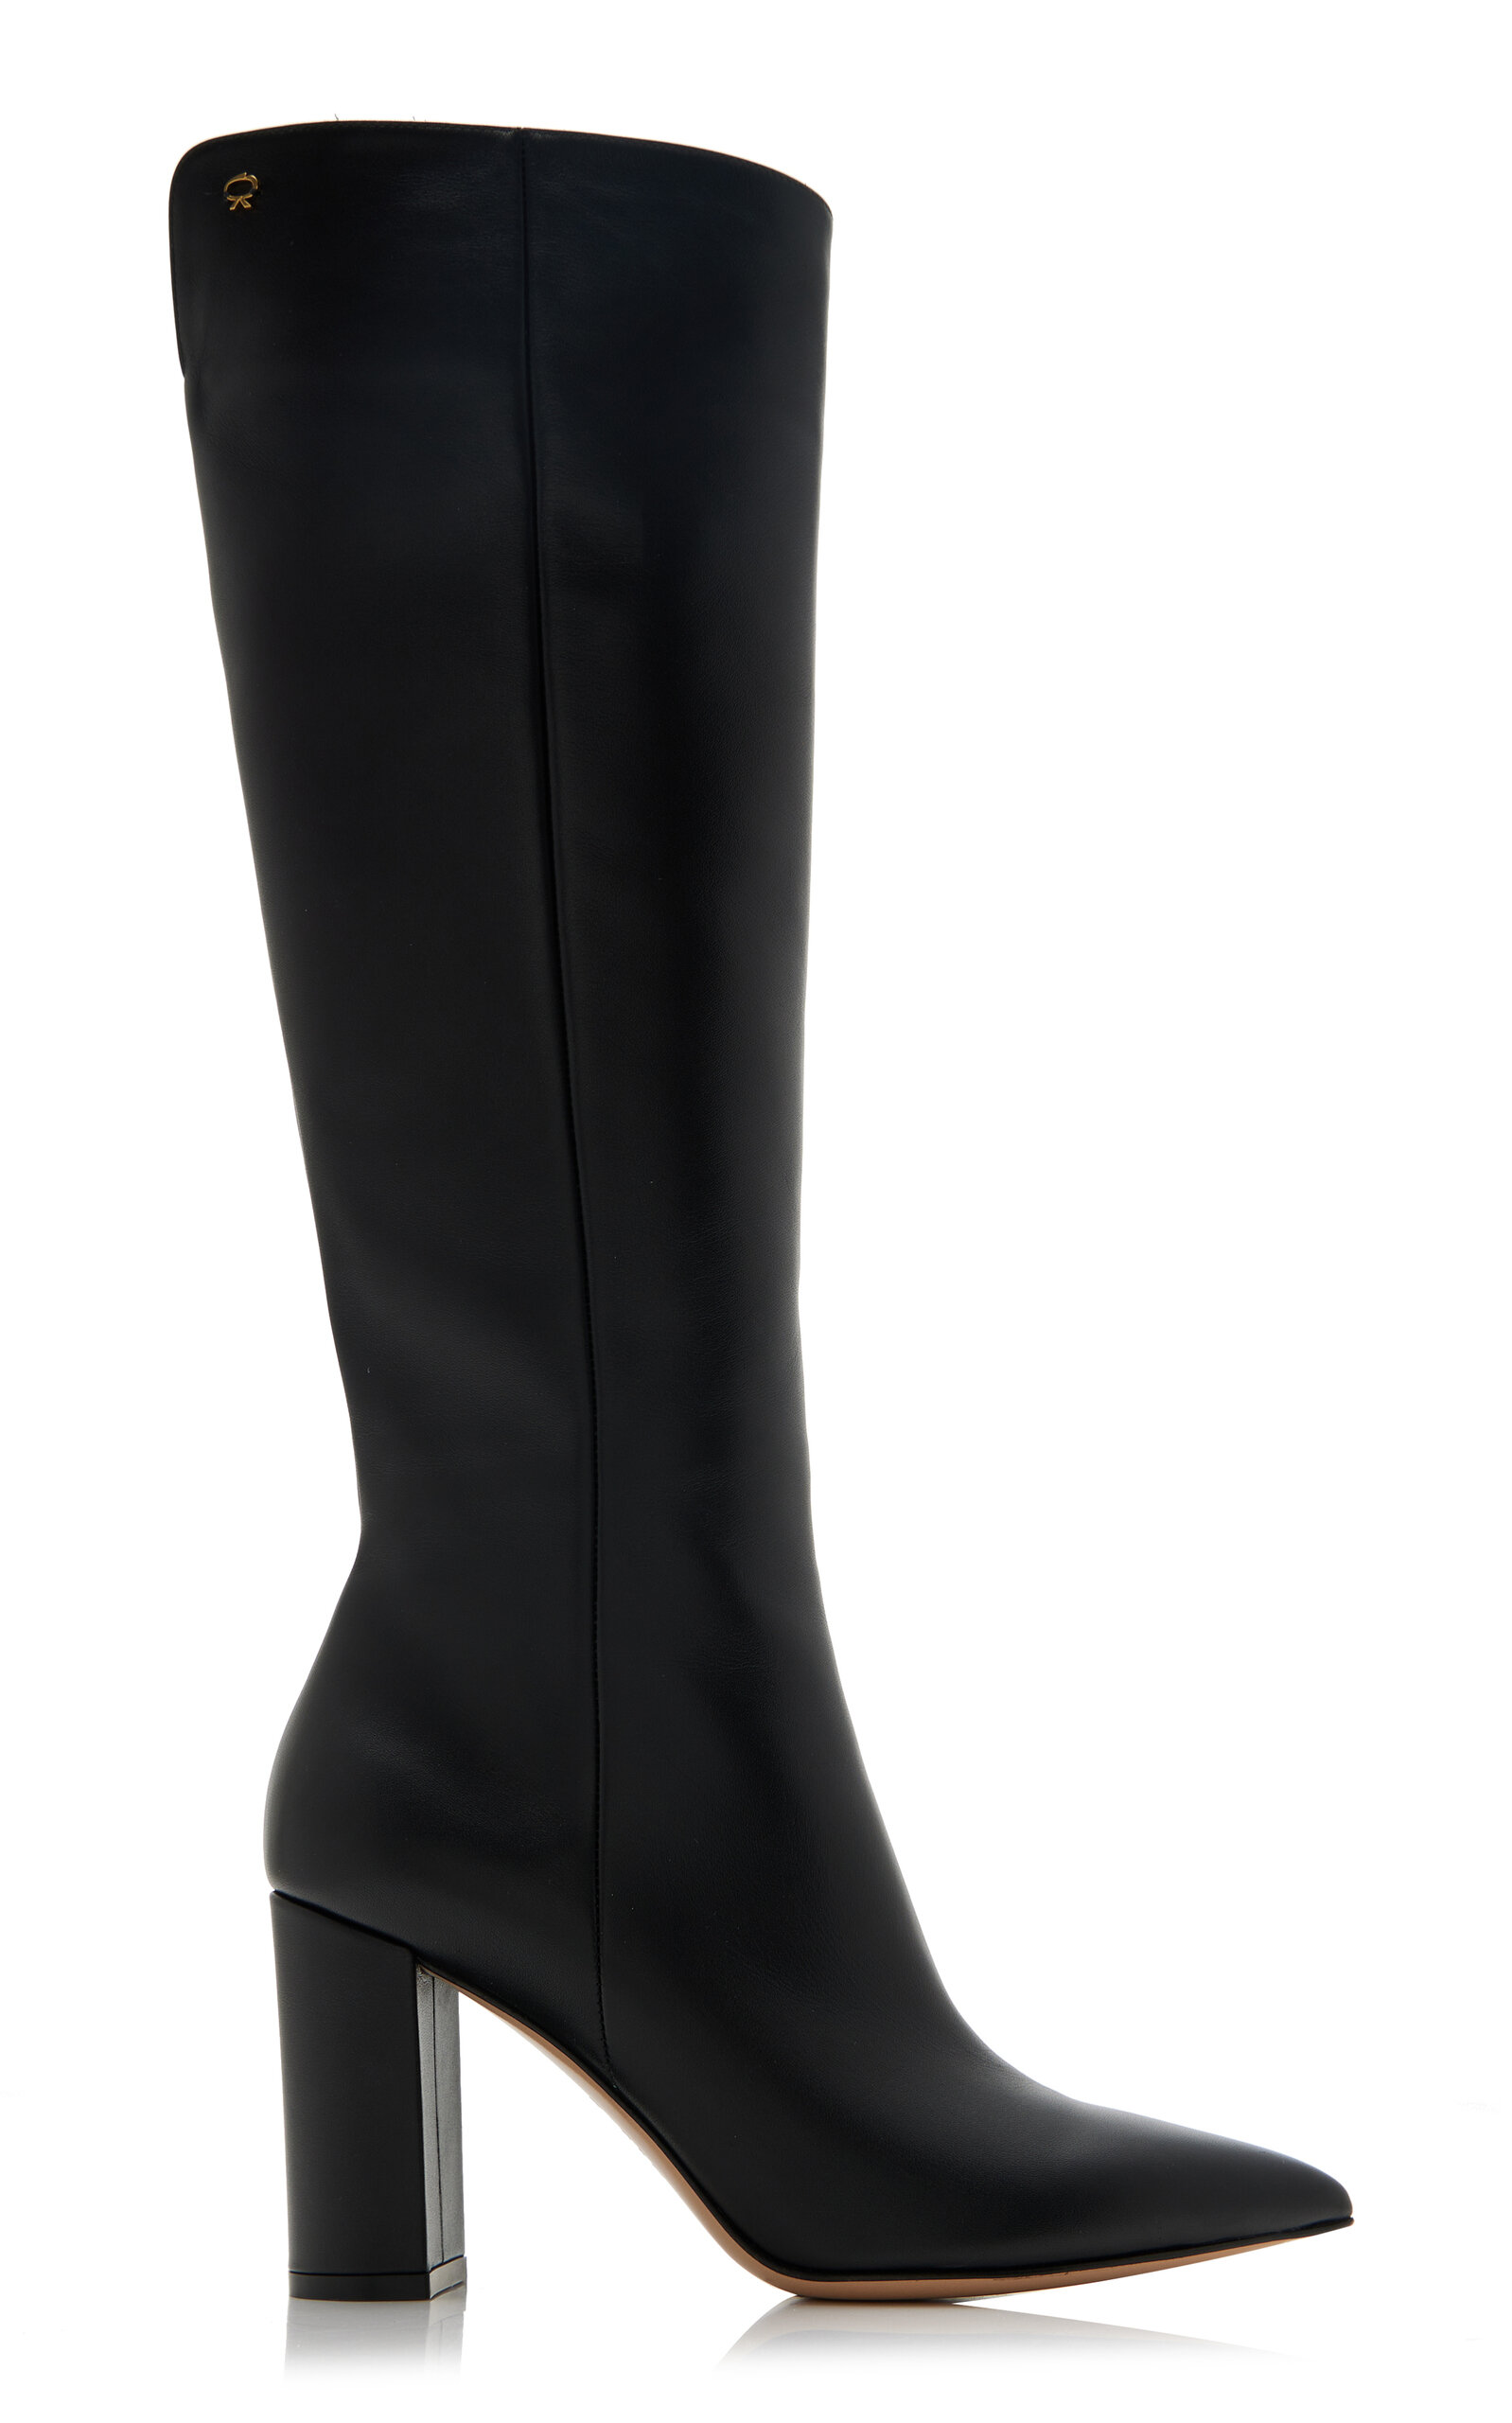 GIANVITO ROSSI LYELL LEATHER KNEE BOOTS